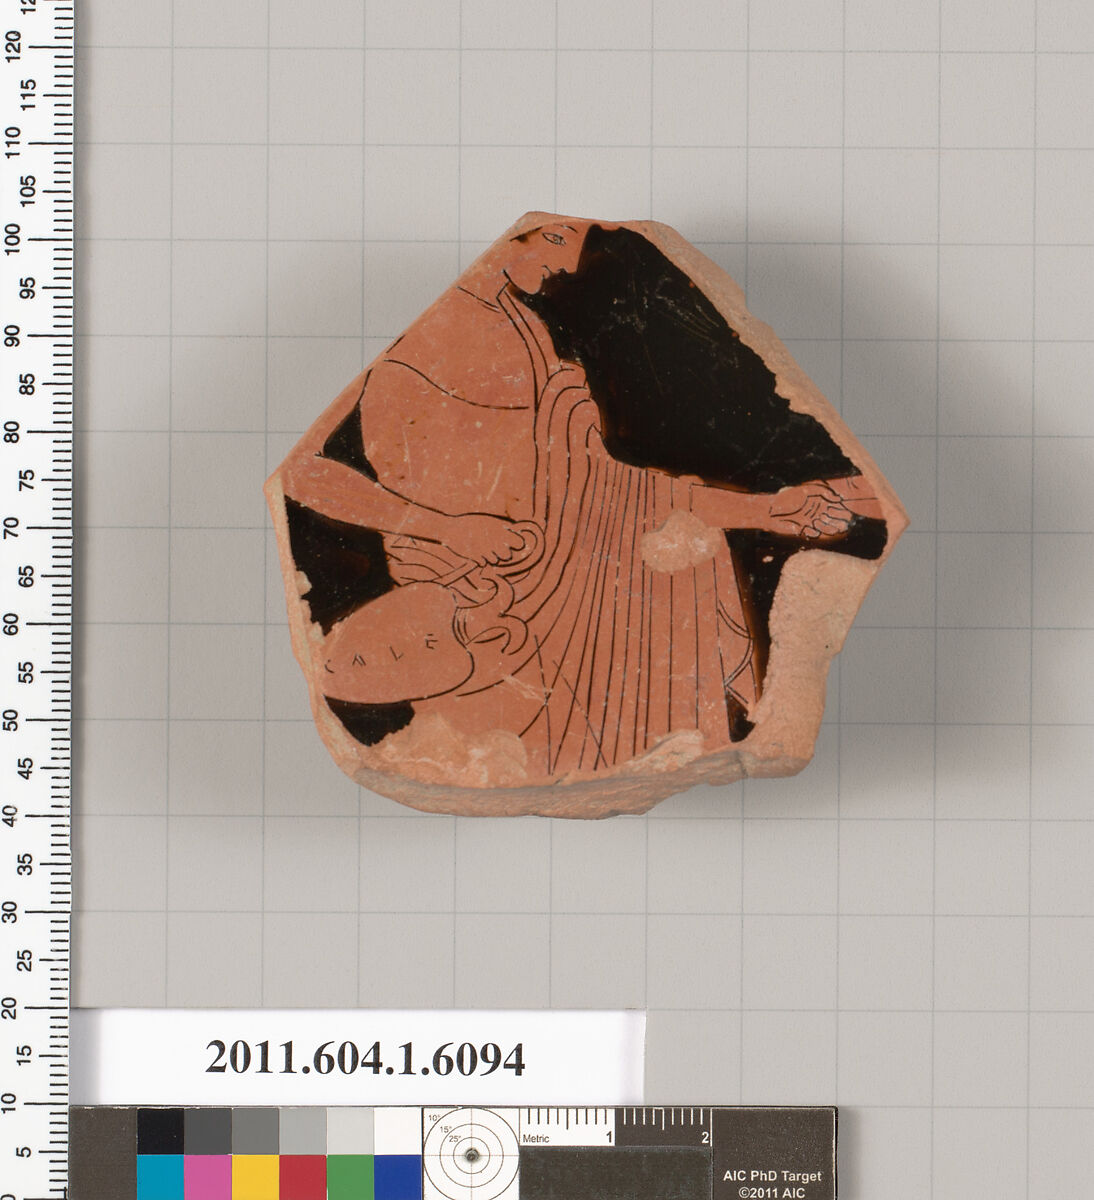 Terracotta fragment of a kylix (drinking cup), Attributed to Apollodoros [DvB], Terracotta, Greek, Attic 